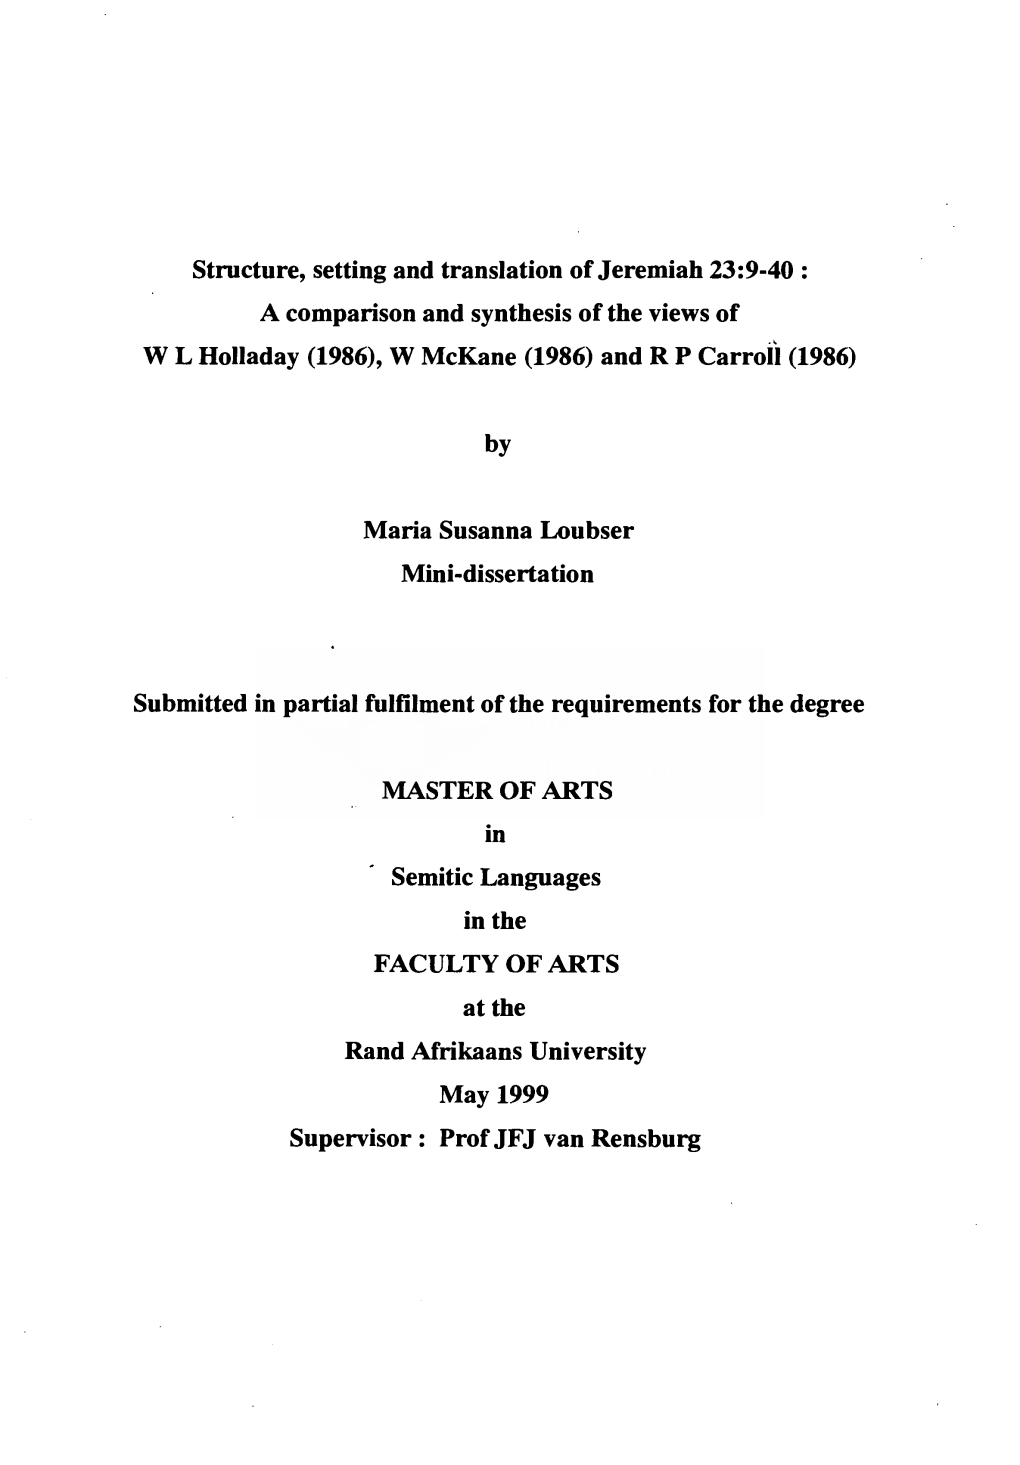 Structure, Setting and Translation of Jeremiah 23:9-40 : a Comparison and Synthesis of the Views of W L Holladay (1986), W Mckane (1986) and R P Carroll (1986)